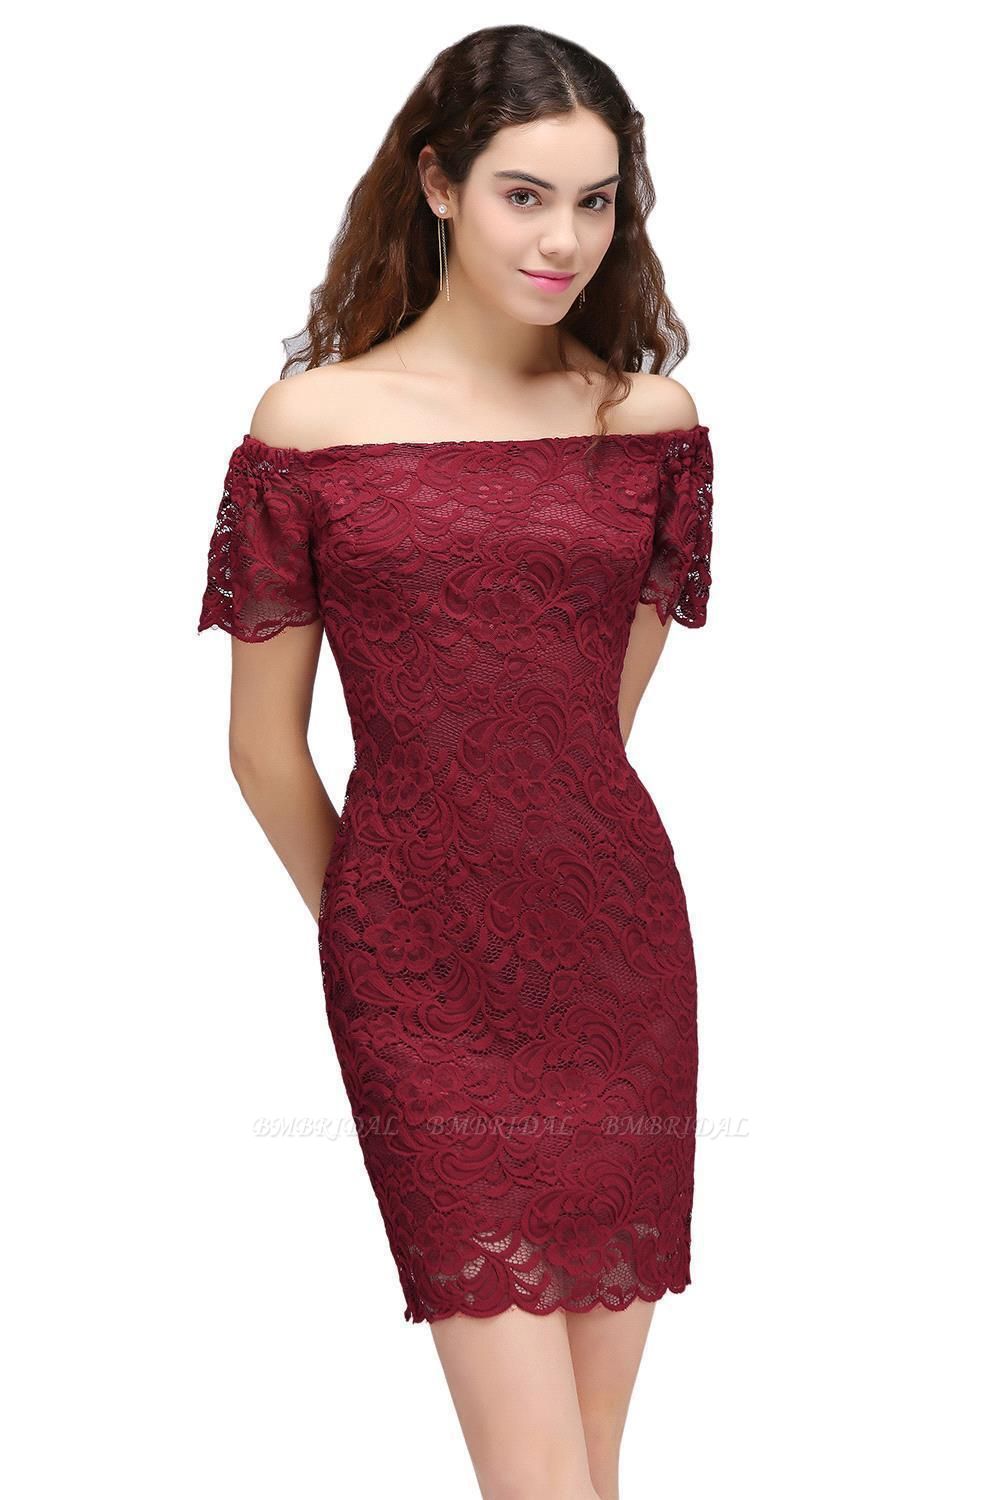 BMbridal Burgundy Lace Sheath Homecoming Dress Short Sleeves Cocktail Dress